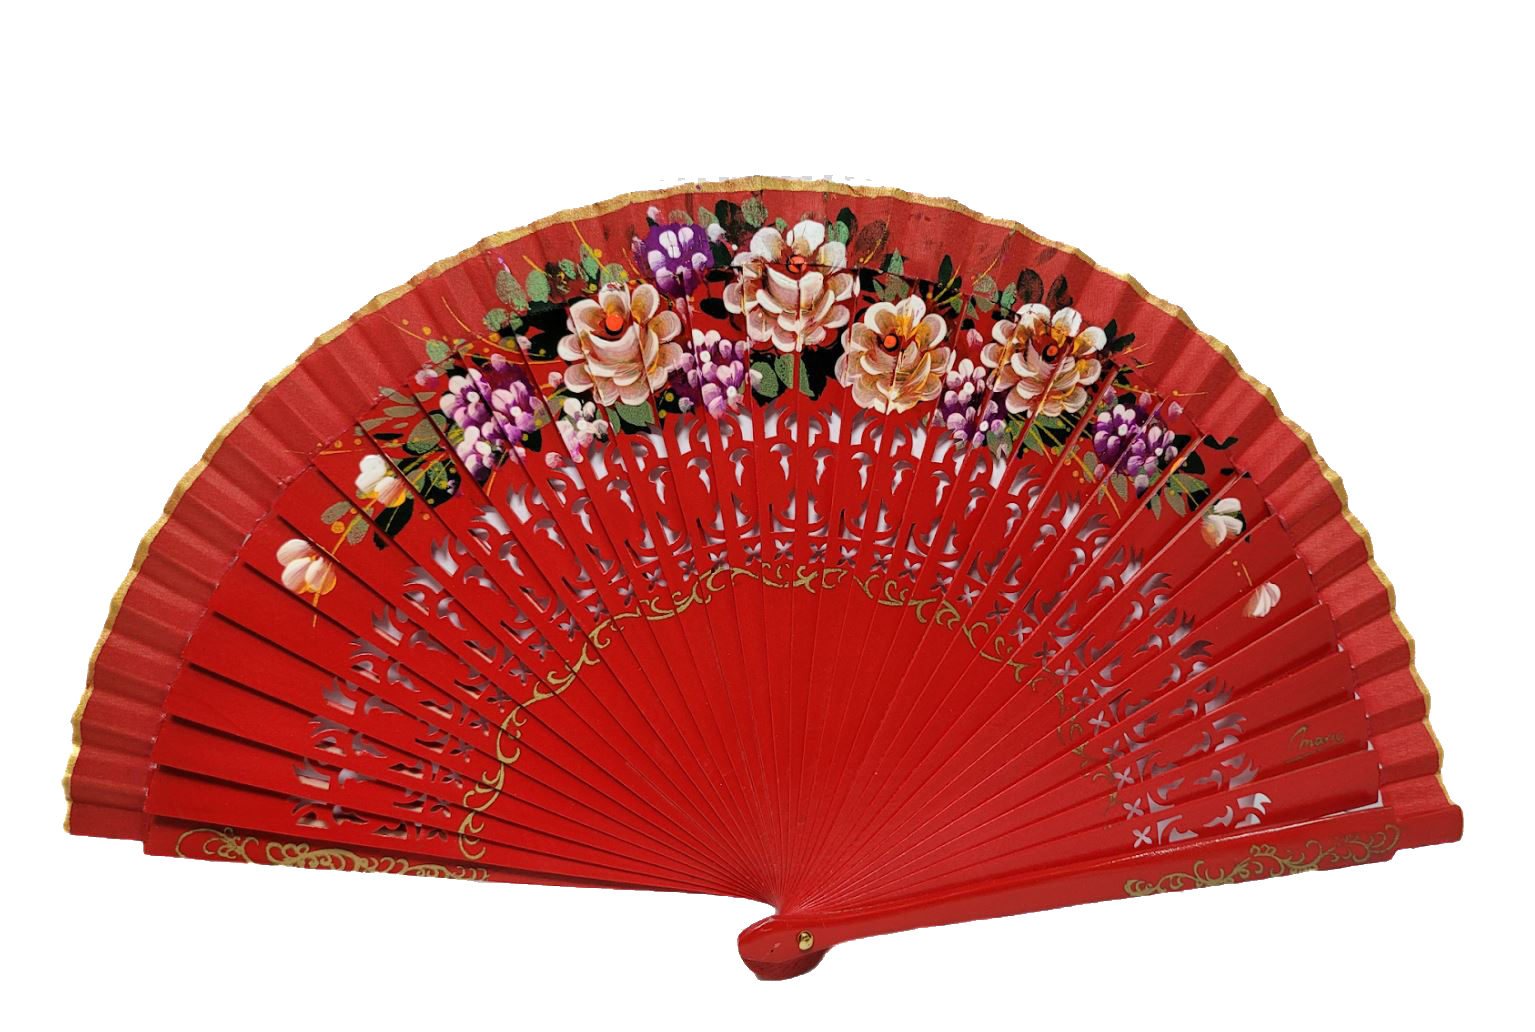 Fretwork Fan and Painted by Two Faces. ref 1137RJ 4.960€ #503281137RJ